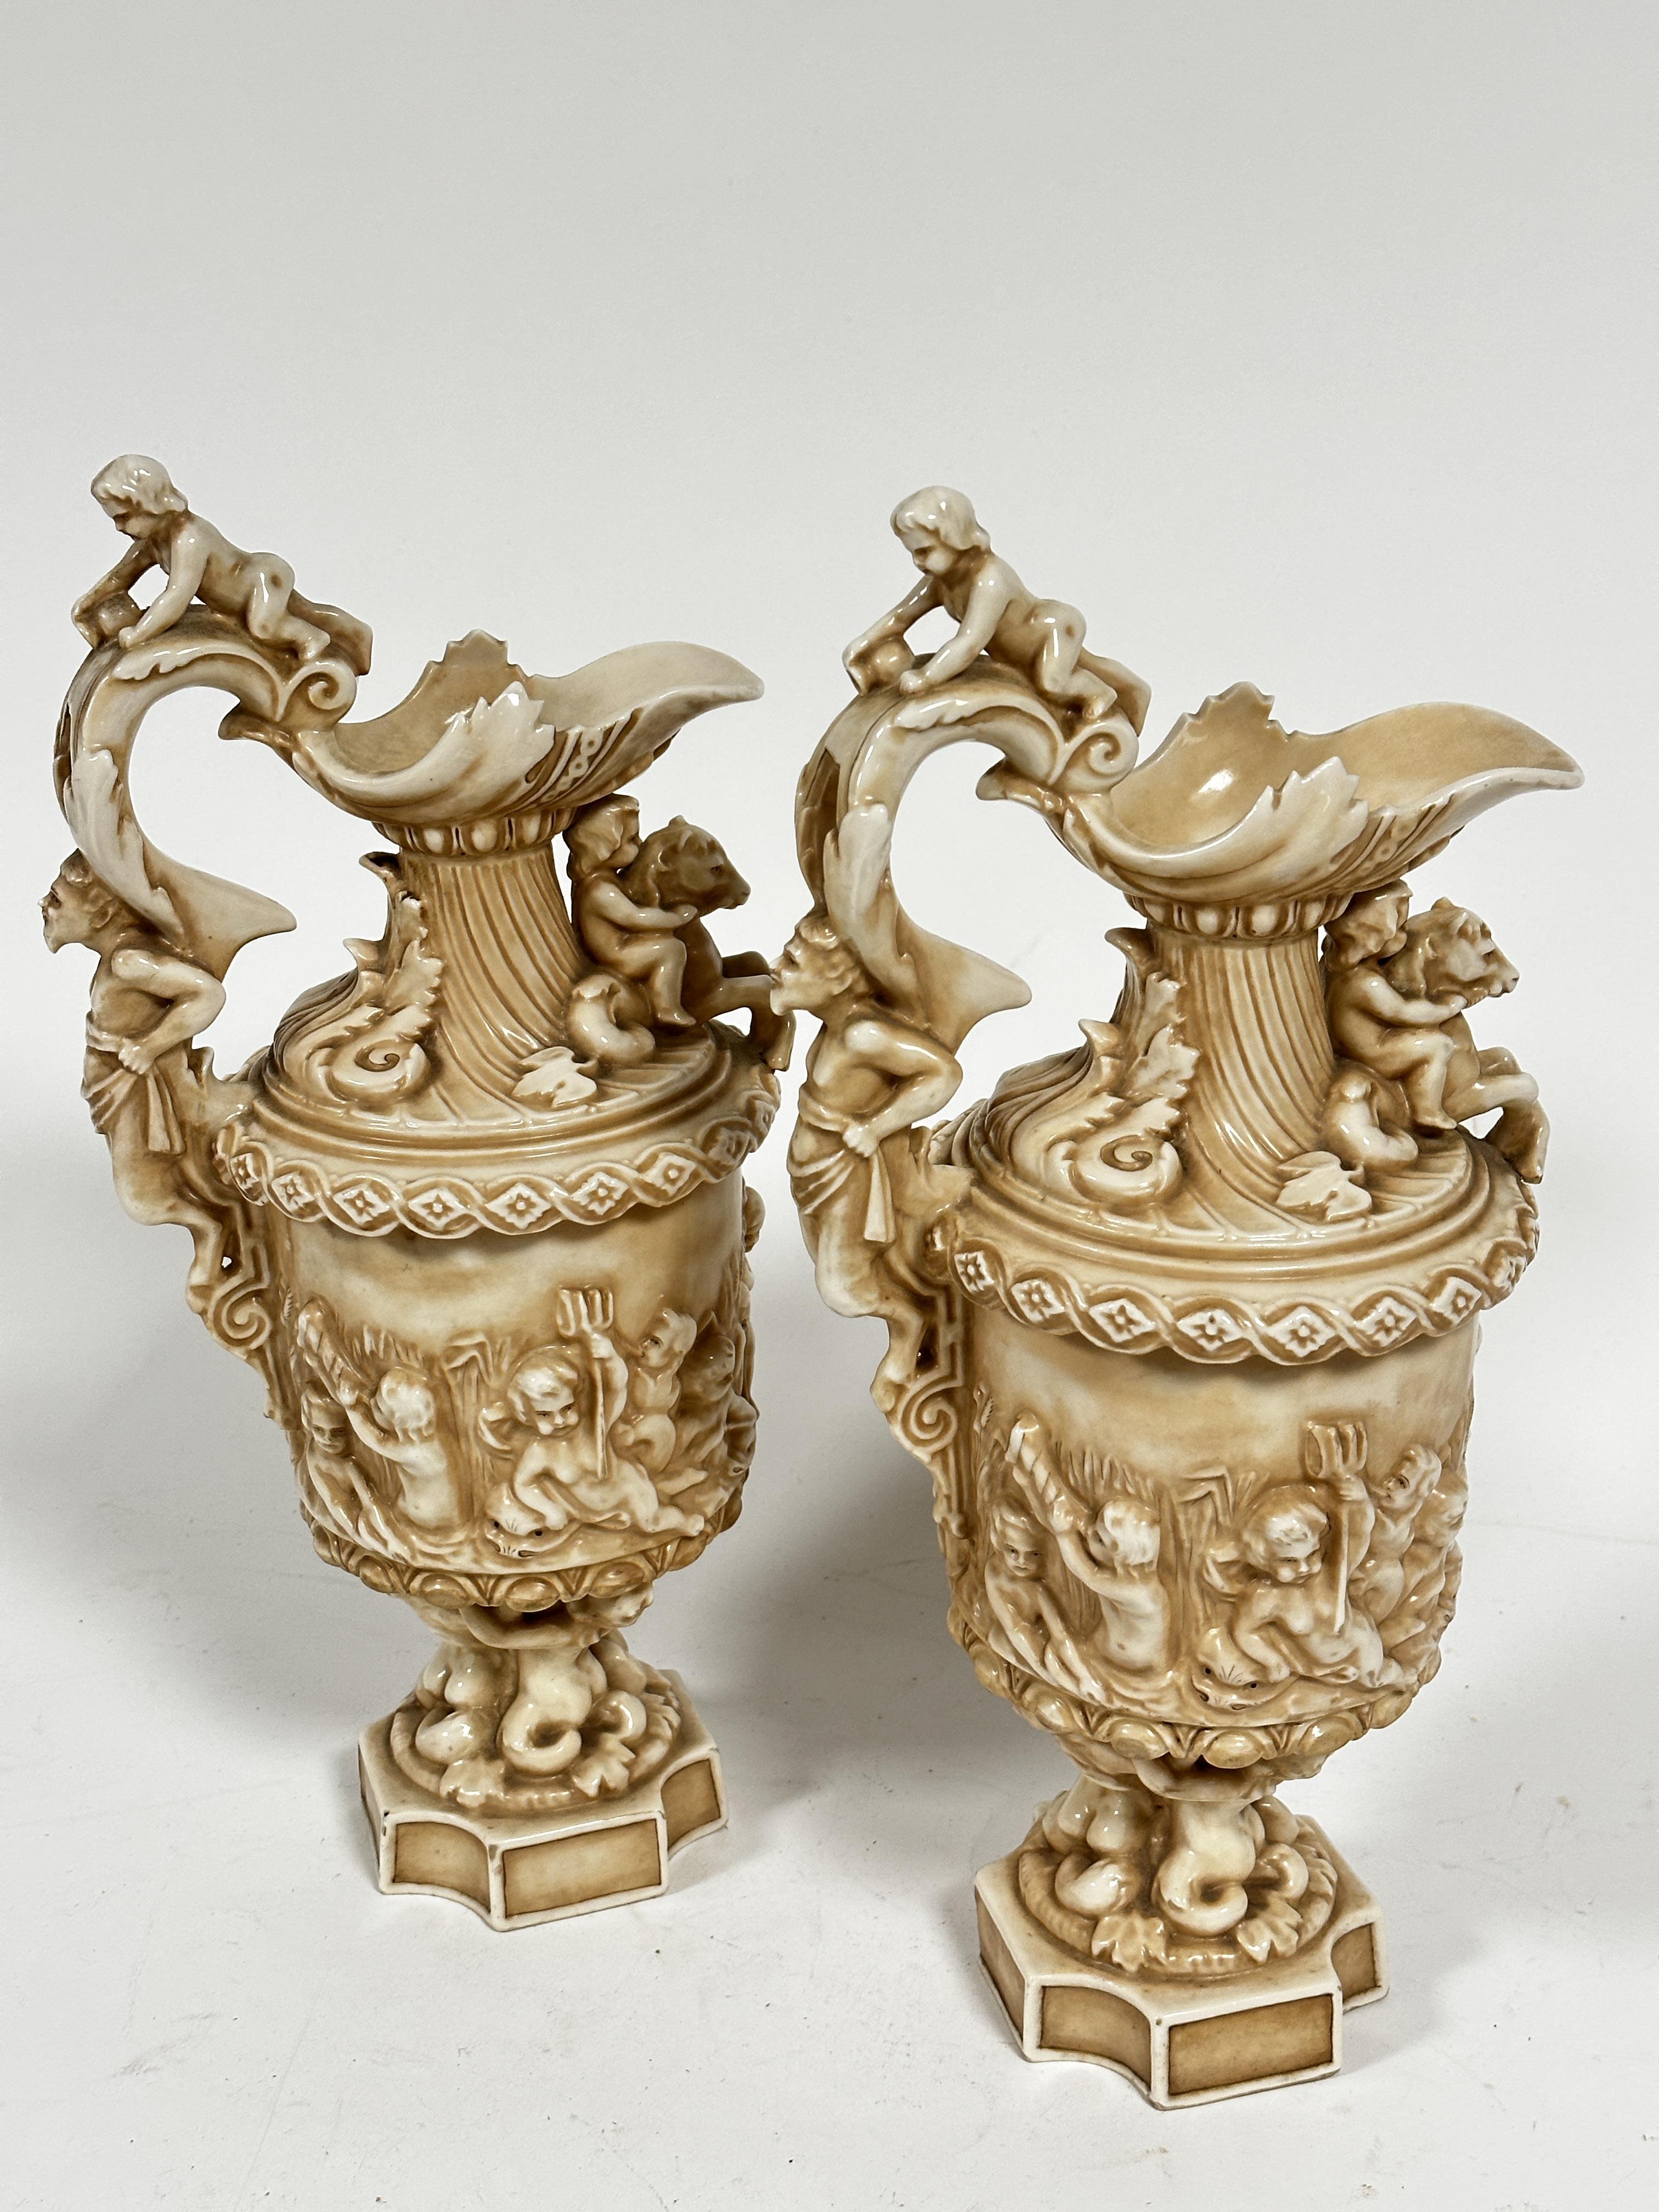 A pair of late 19thc Rudolstadt Straus & Sohne ewers, the handles mounted with cherubs with mask - Image 6 of 12